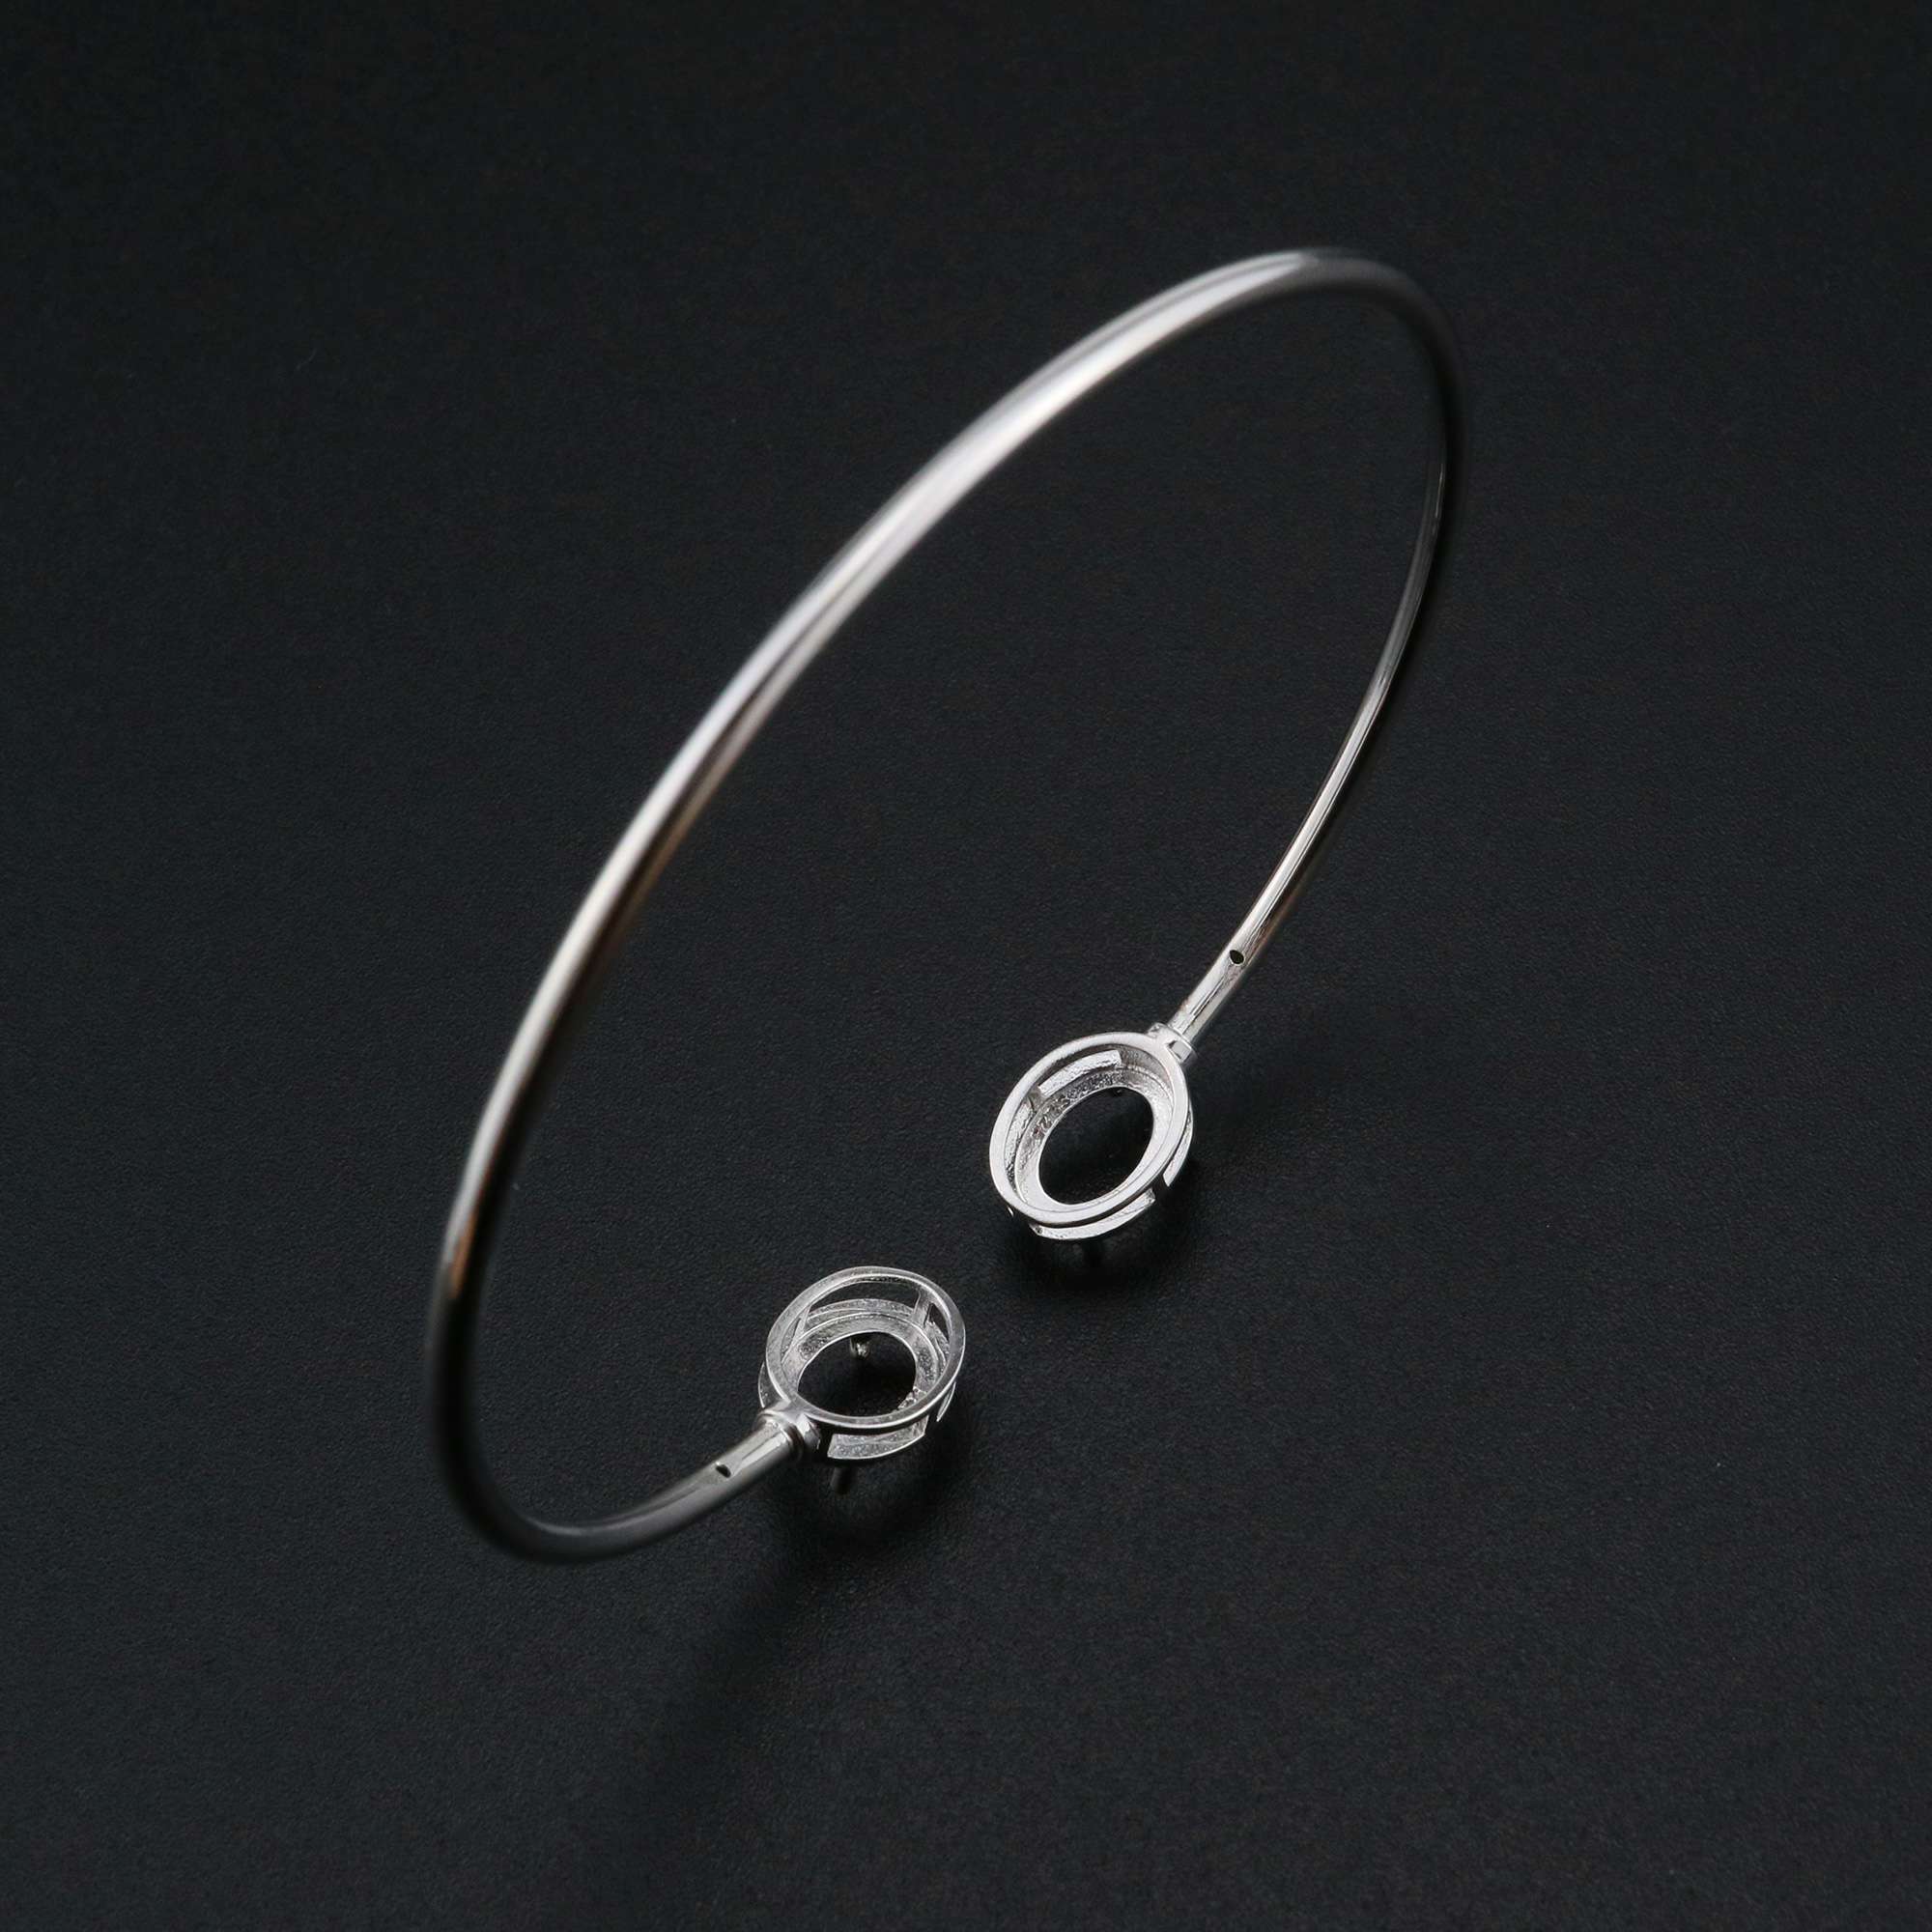 6x8MM Oval Prong Bezel Bangle Settings Solid 925 Sterling Silver DIY Bracelet Supplies for Gemstone 2.2'' Diameter 1900255 - Click Image to Close